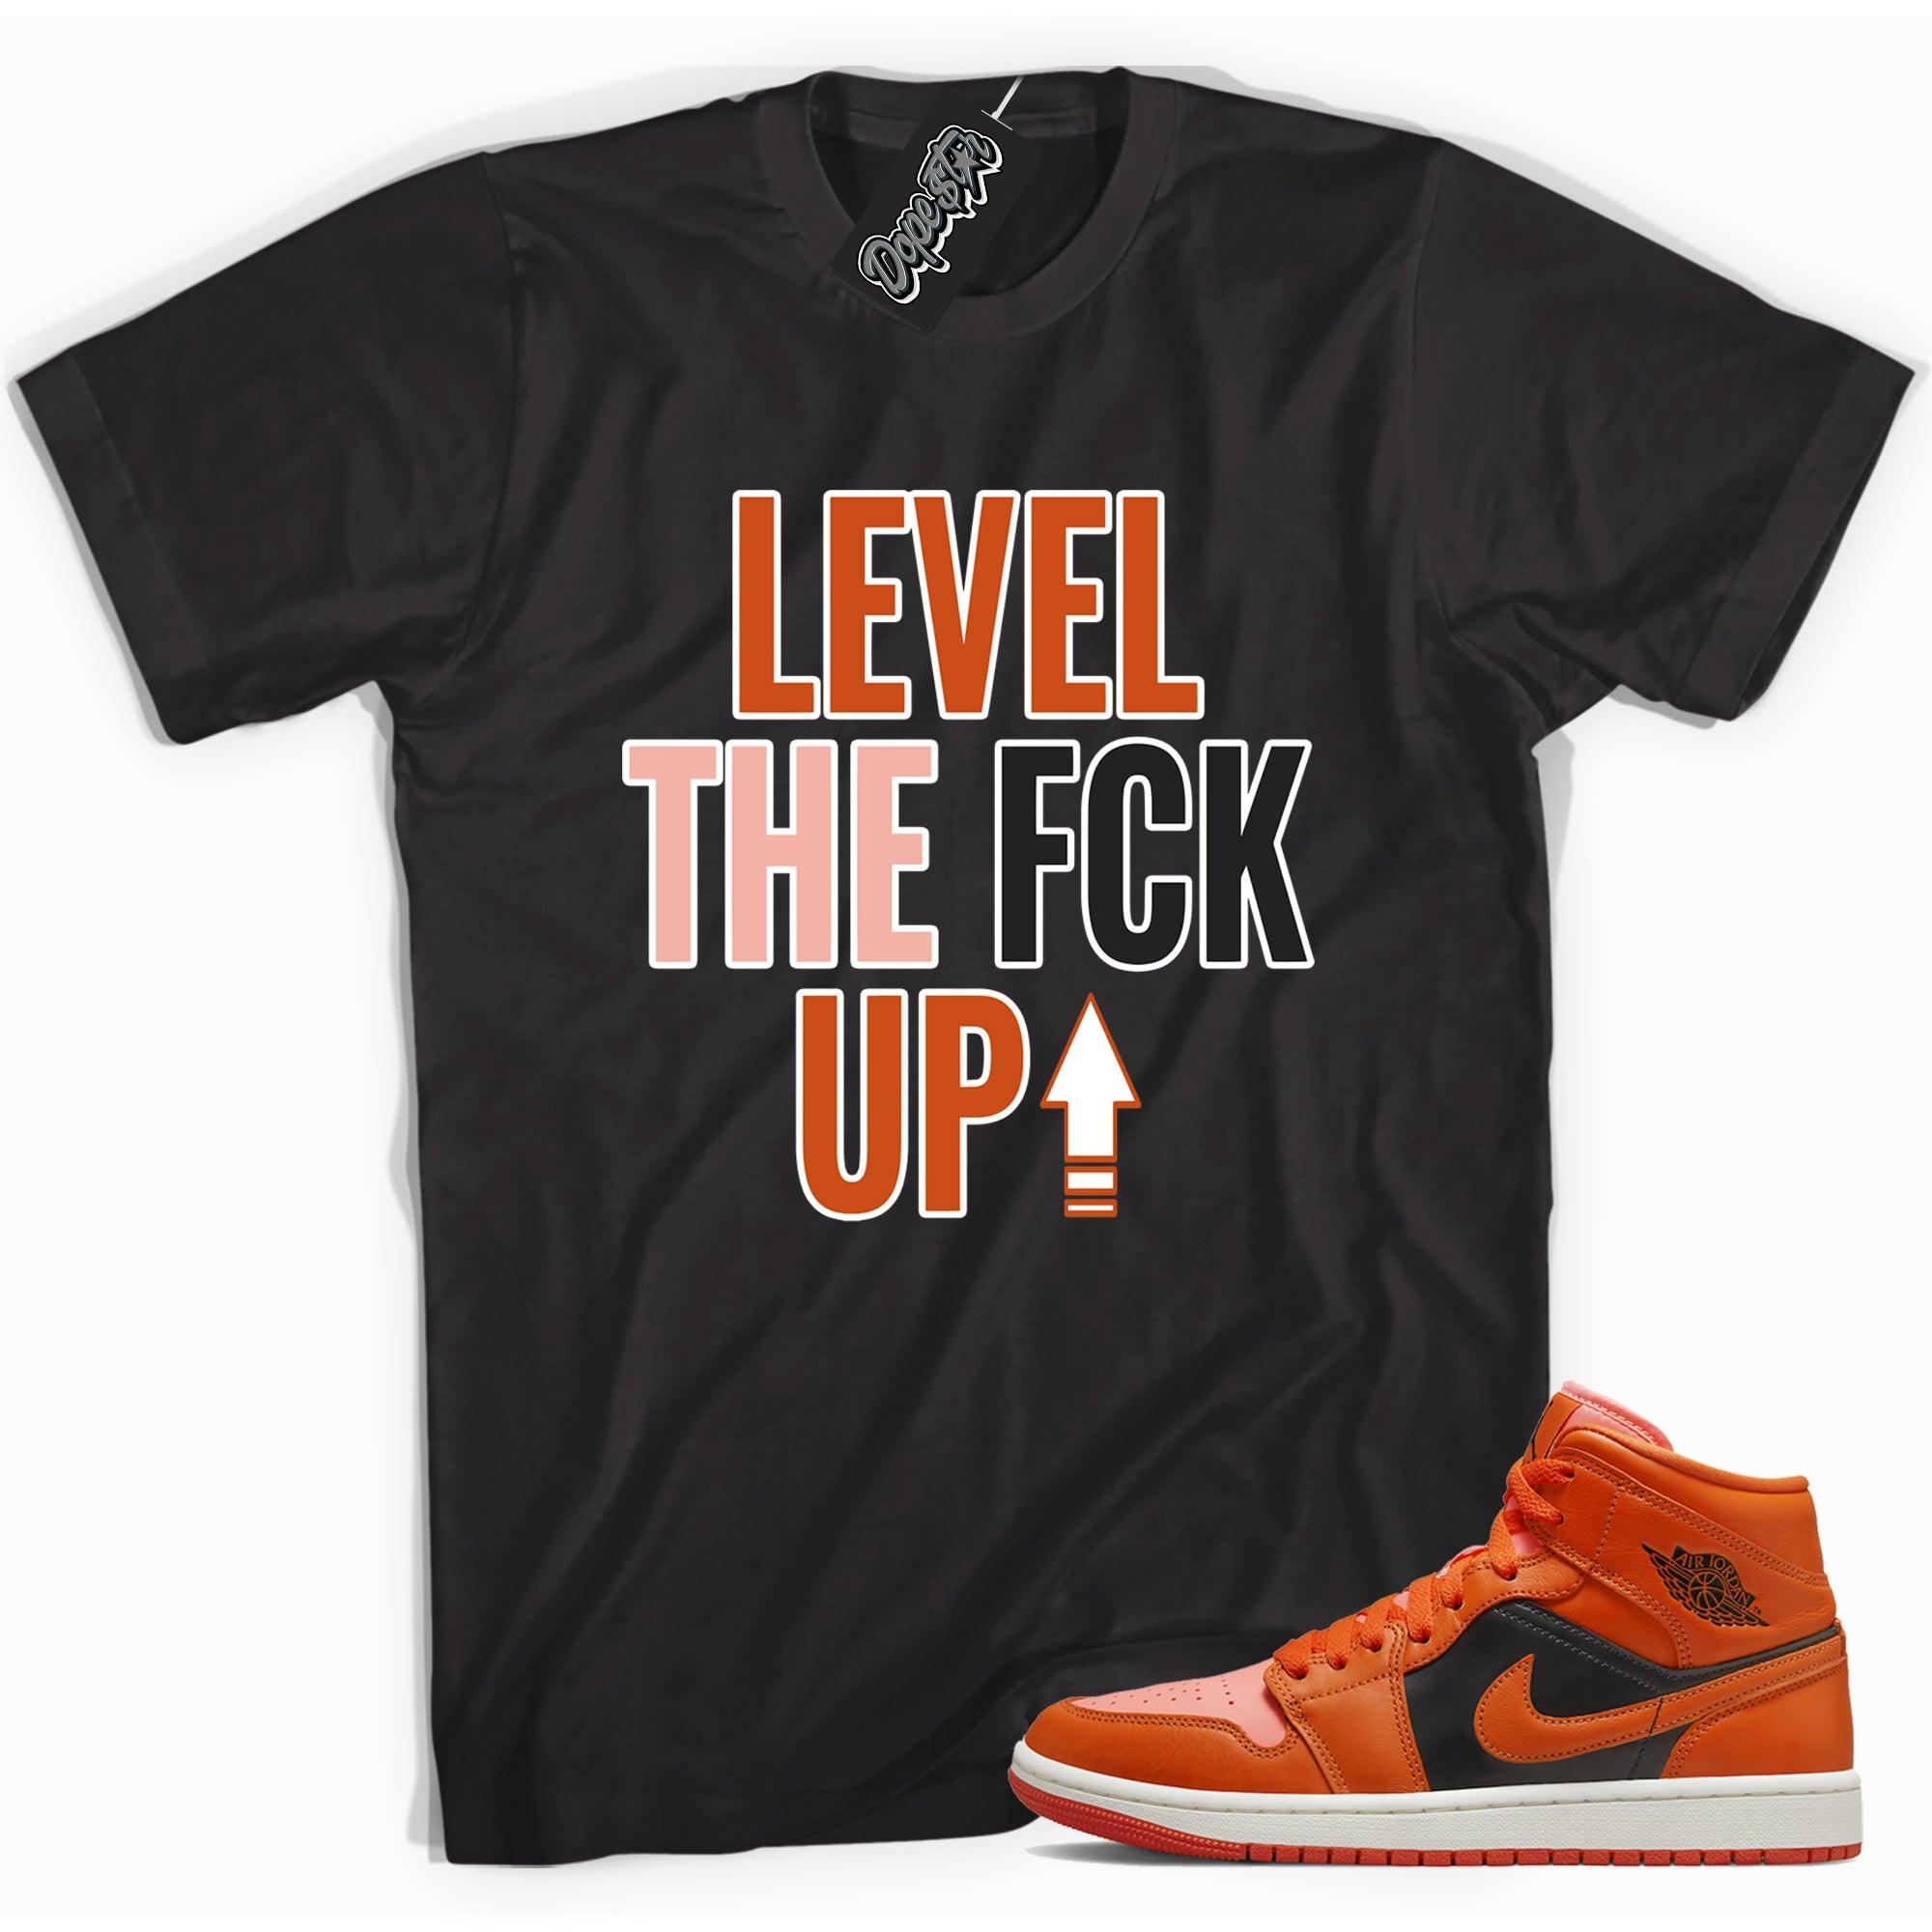 Cool black graphic tee with 'Level Up' print, that perfectly matches Air Jordan 1 Mid Orange Black sneakers.